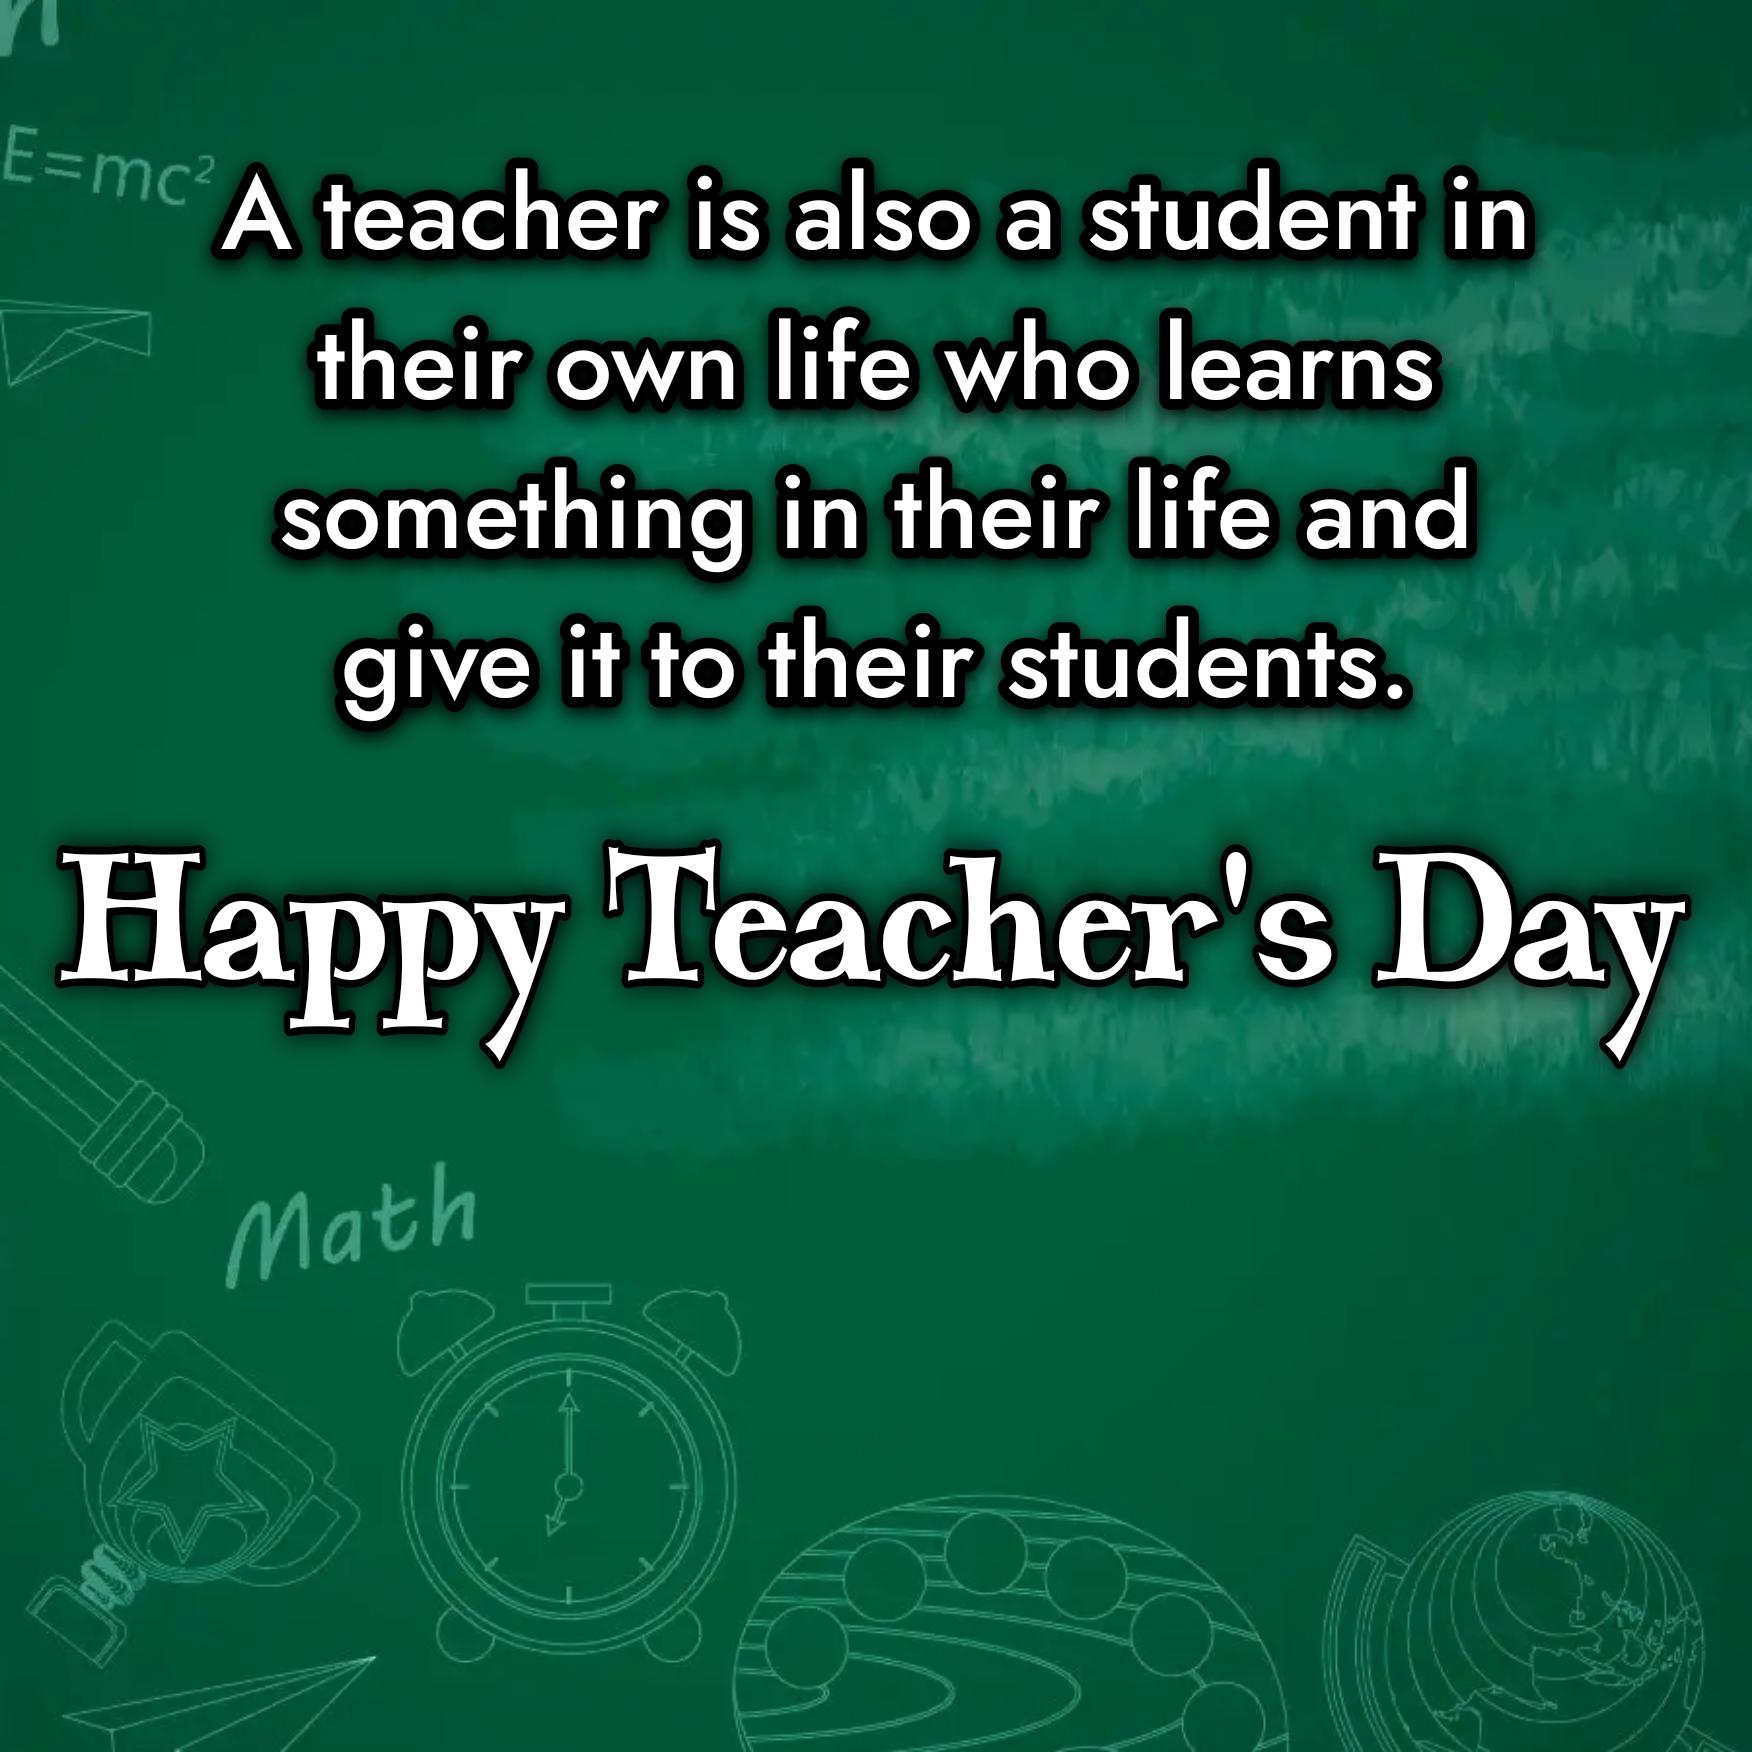 A teacher is also a student in their own life